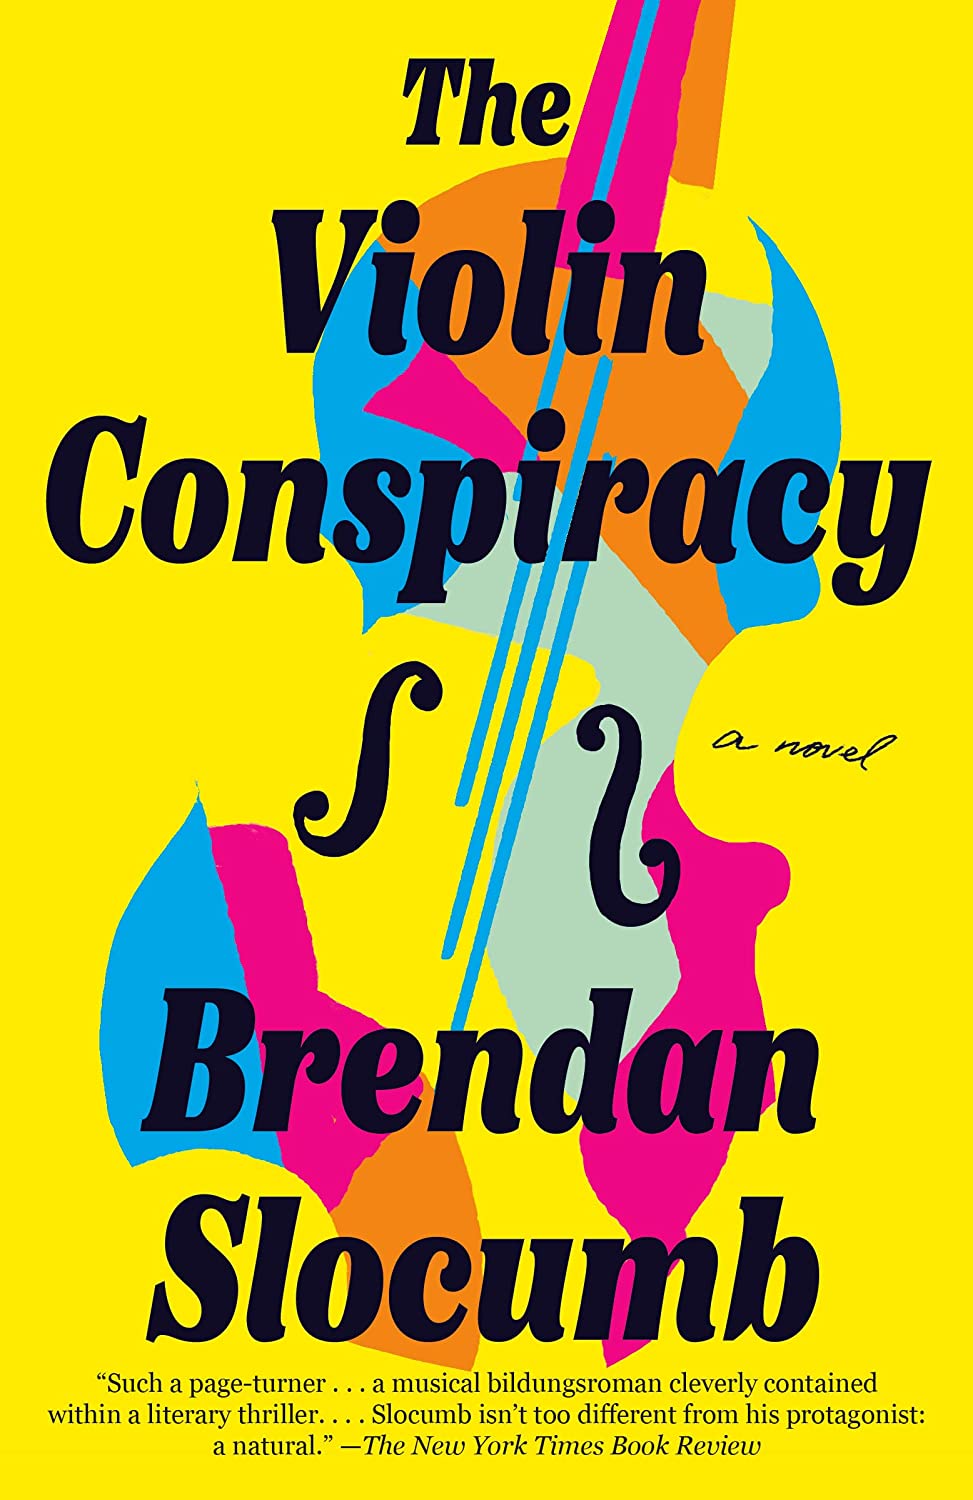 The Violin Conspiracy book cover